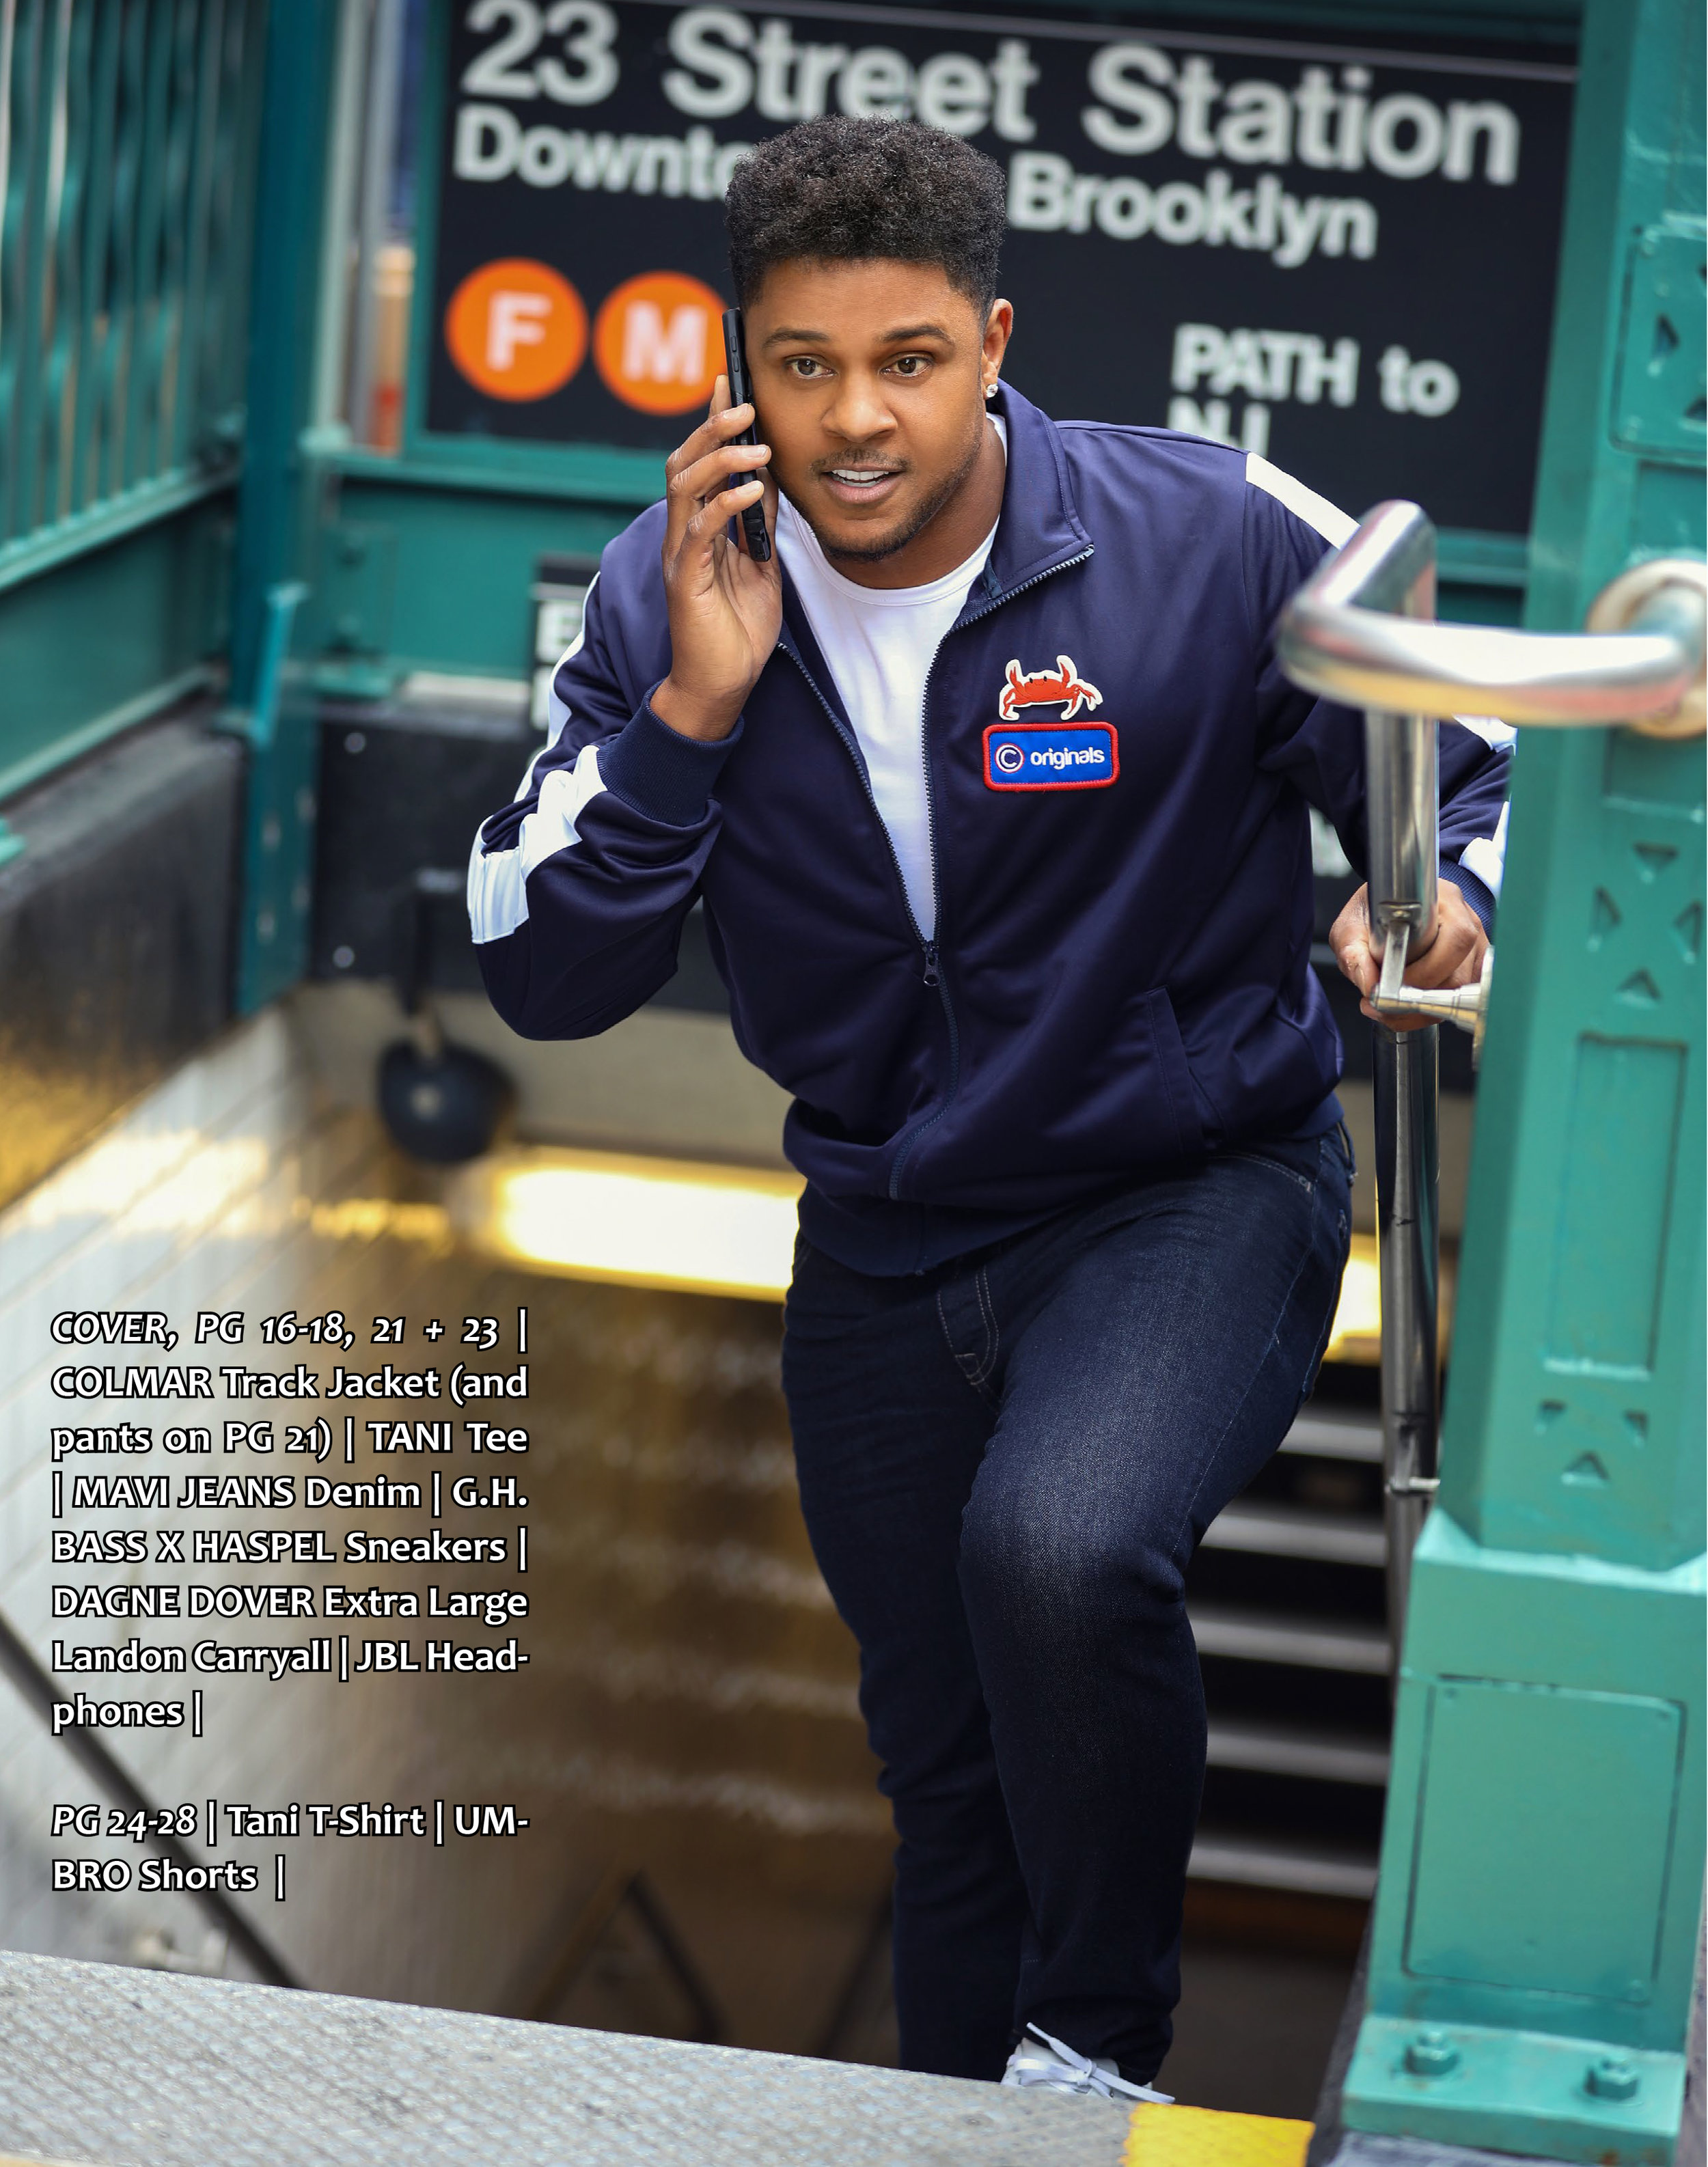 AM JUN HITTING THE STREETS WITH POOCH HALL-3.jpg